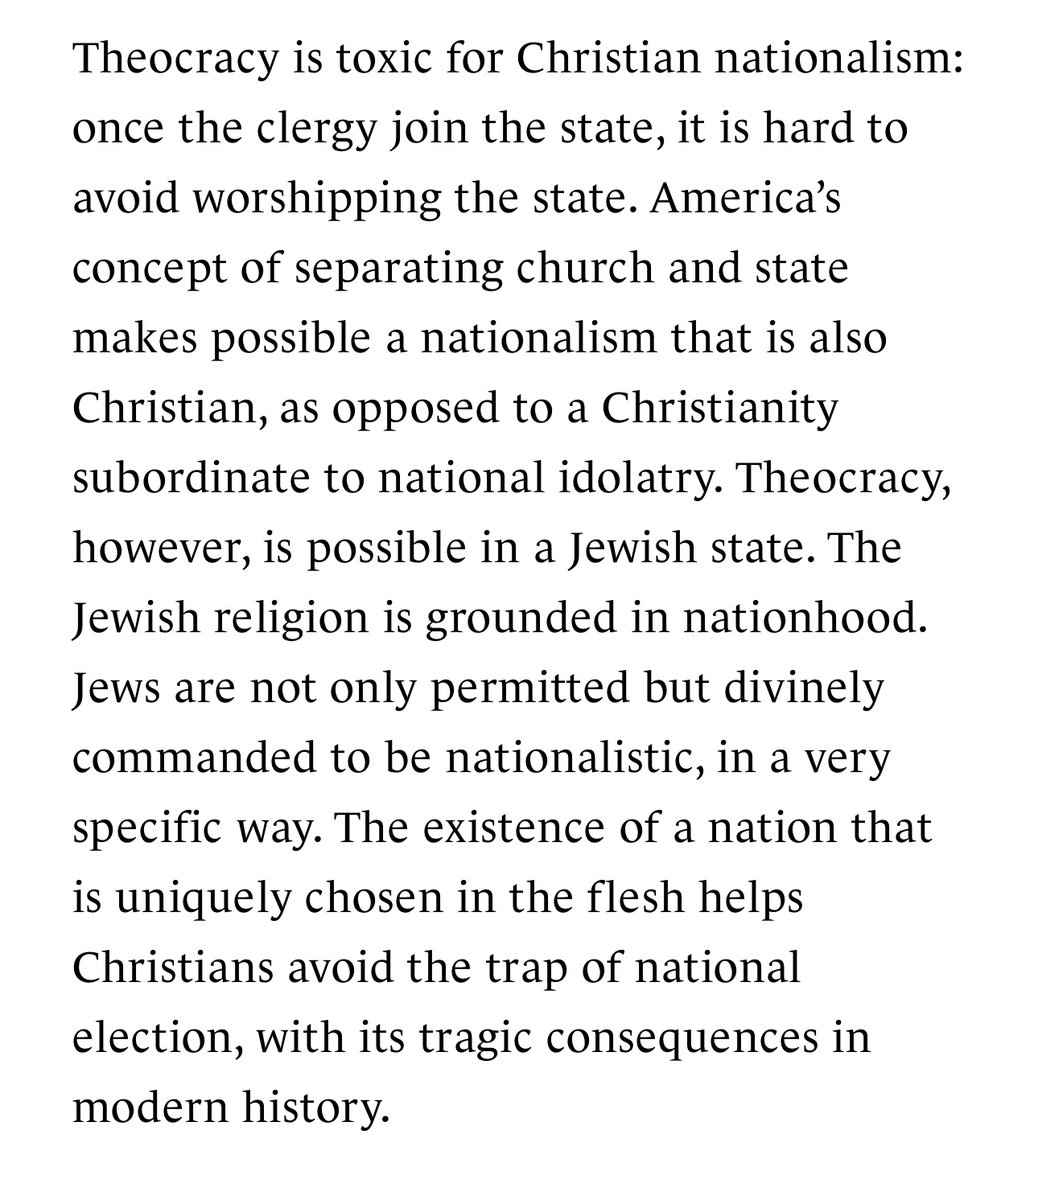 Here’s the thing, we had Christendom for 1500 years, were mostly able to keep civil and ecclesiastical power distinct, and didn’t turn the nation into an object of worship, all without a theocratic Jewish nation-state providing a counter-example.